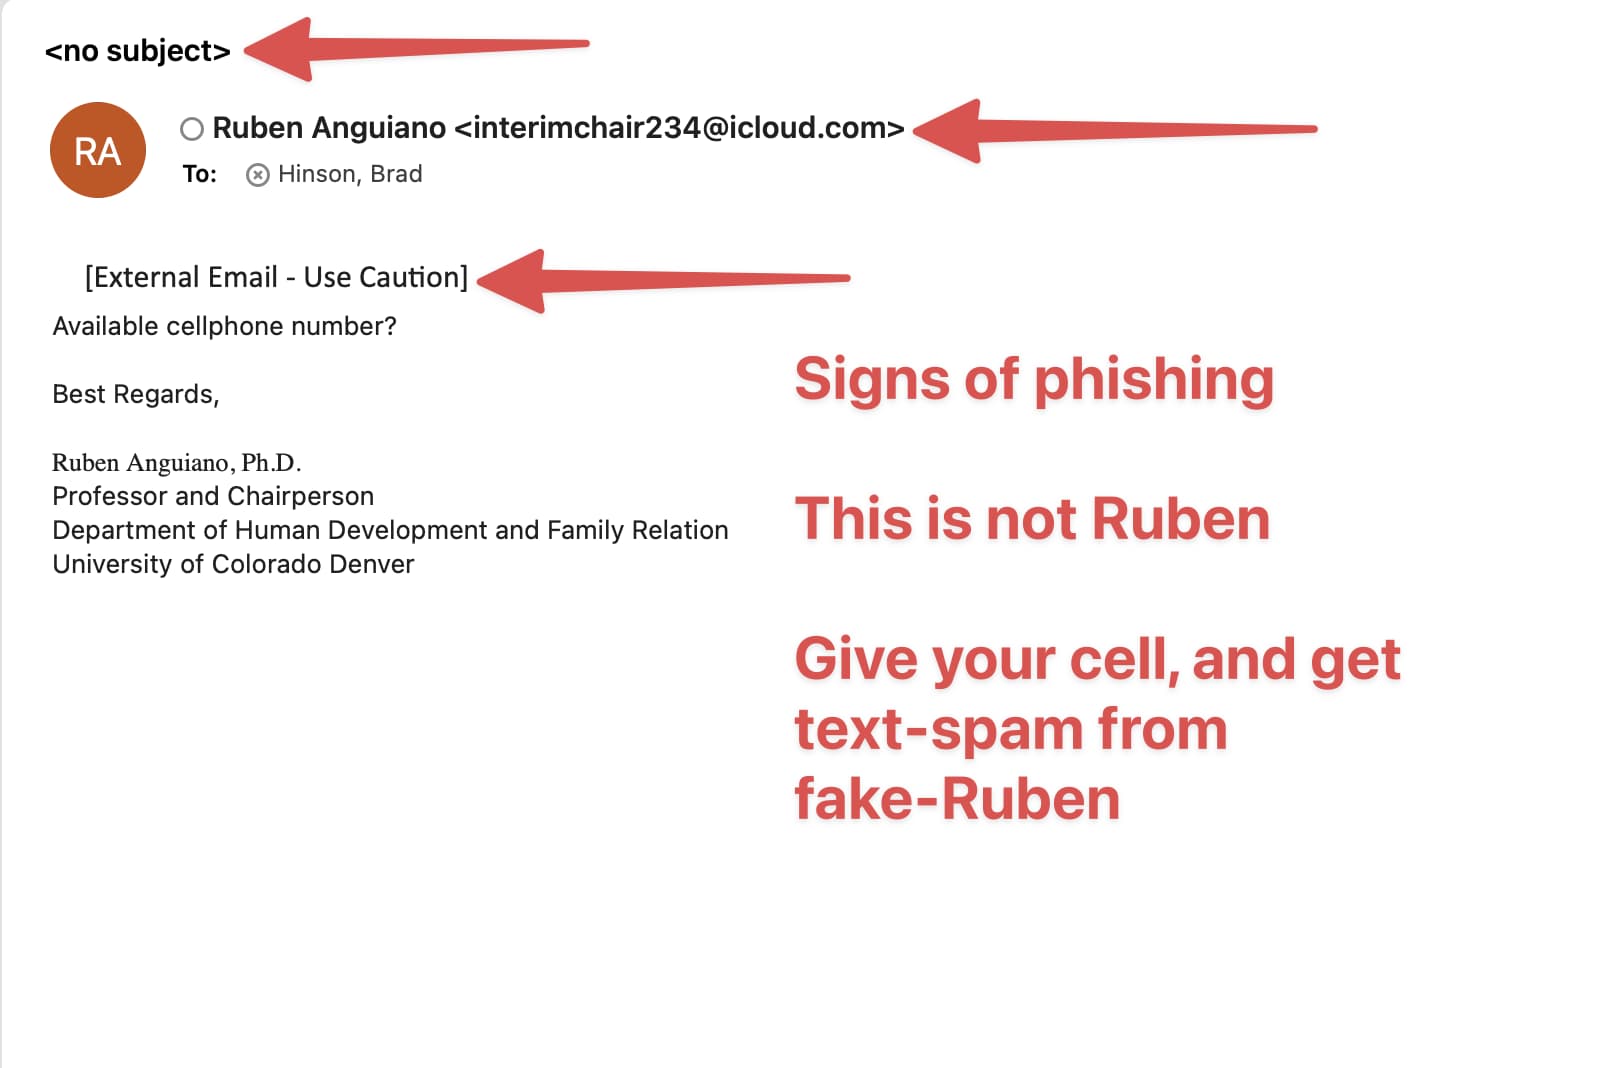 image of phishing email from outside email asking for cell phone number